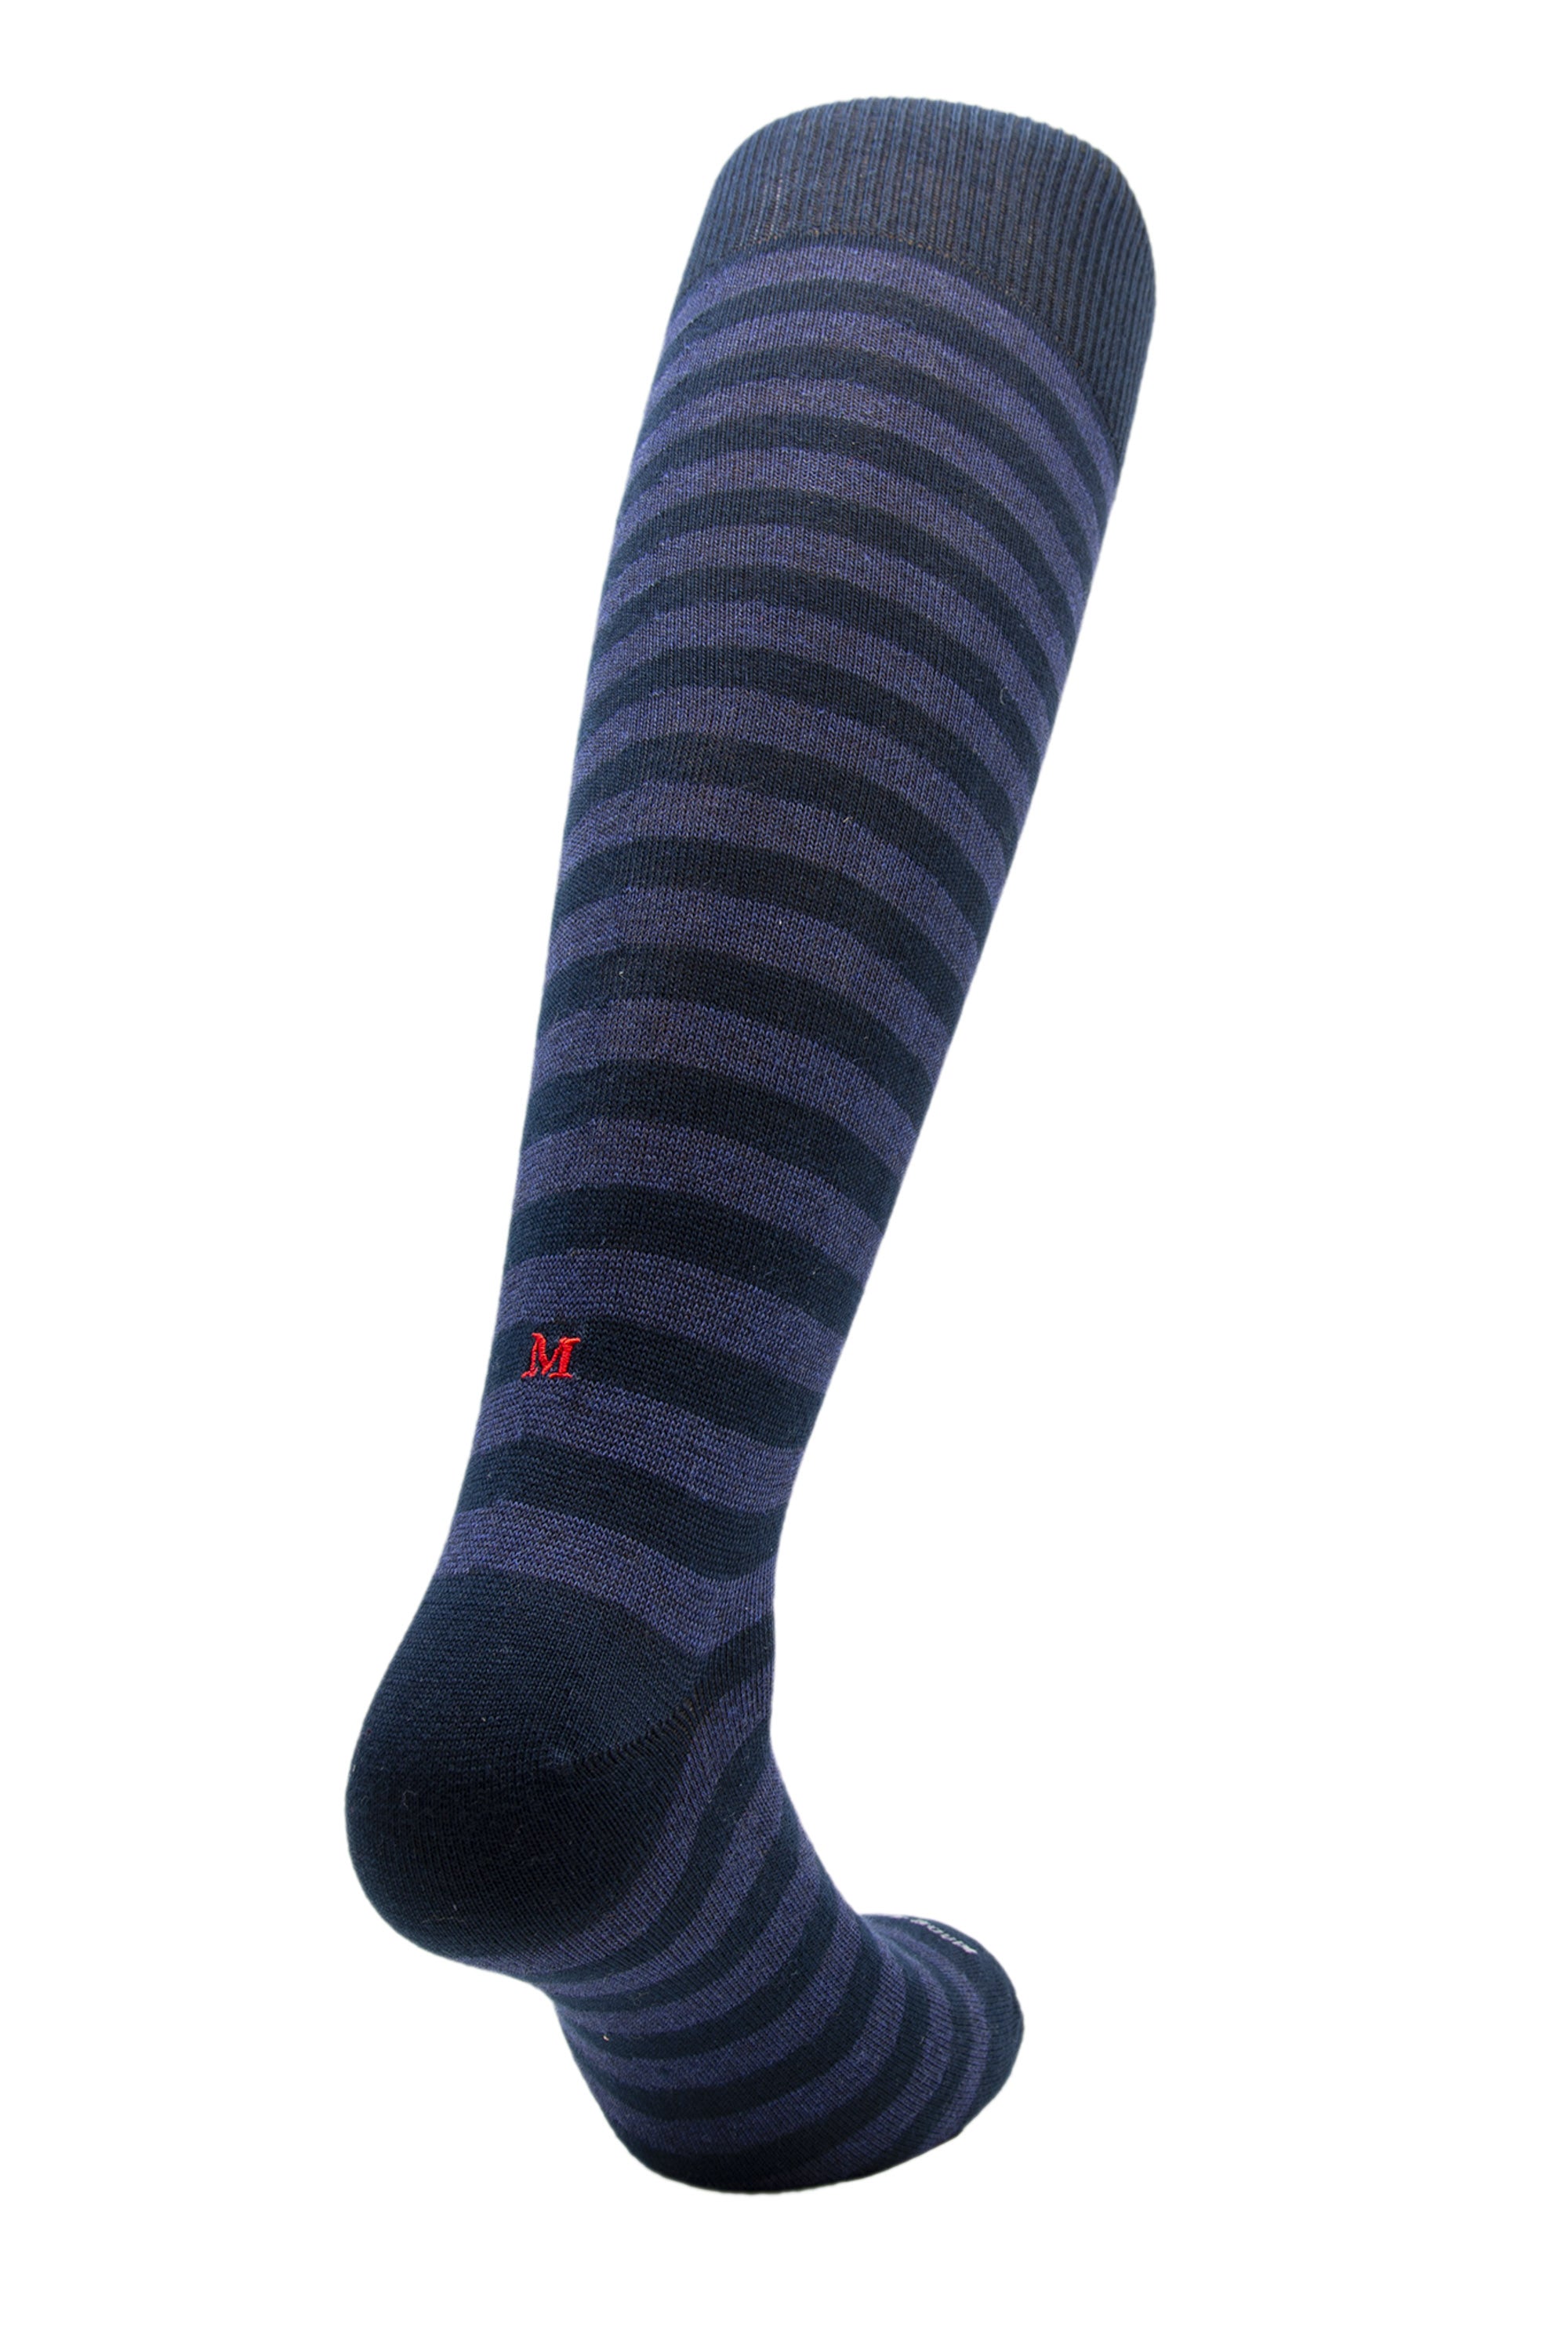 Warm cotton socks with embroidered red initials